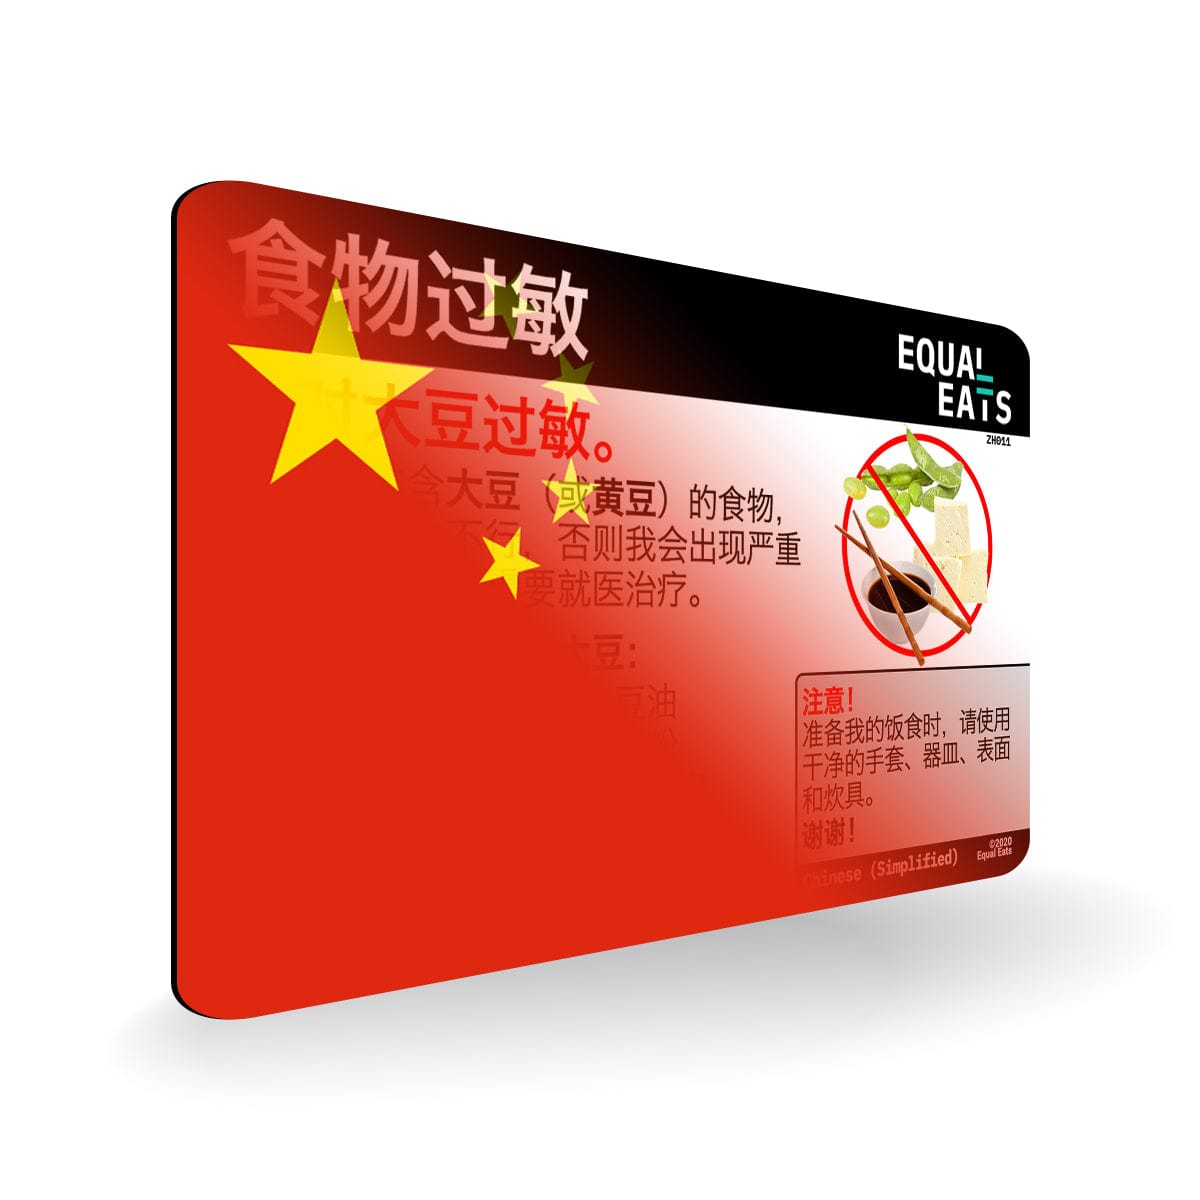 Soy Allergy in Simplified Chinese. Soy Allergy Card for China